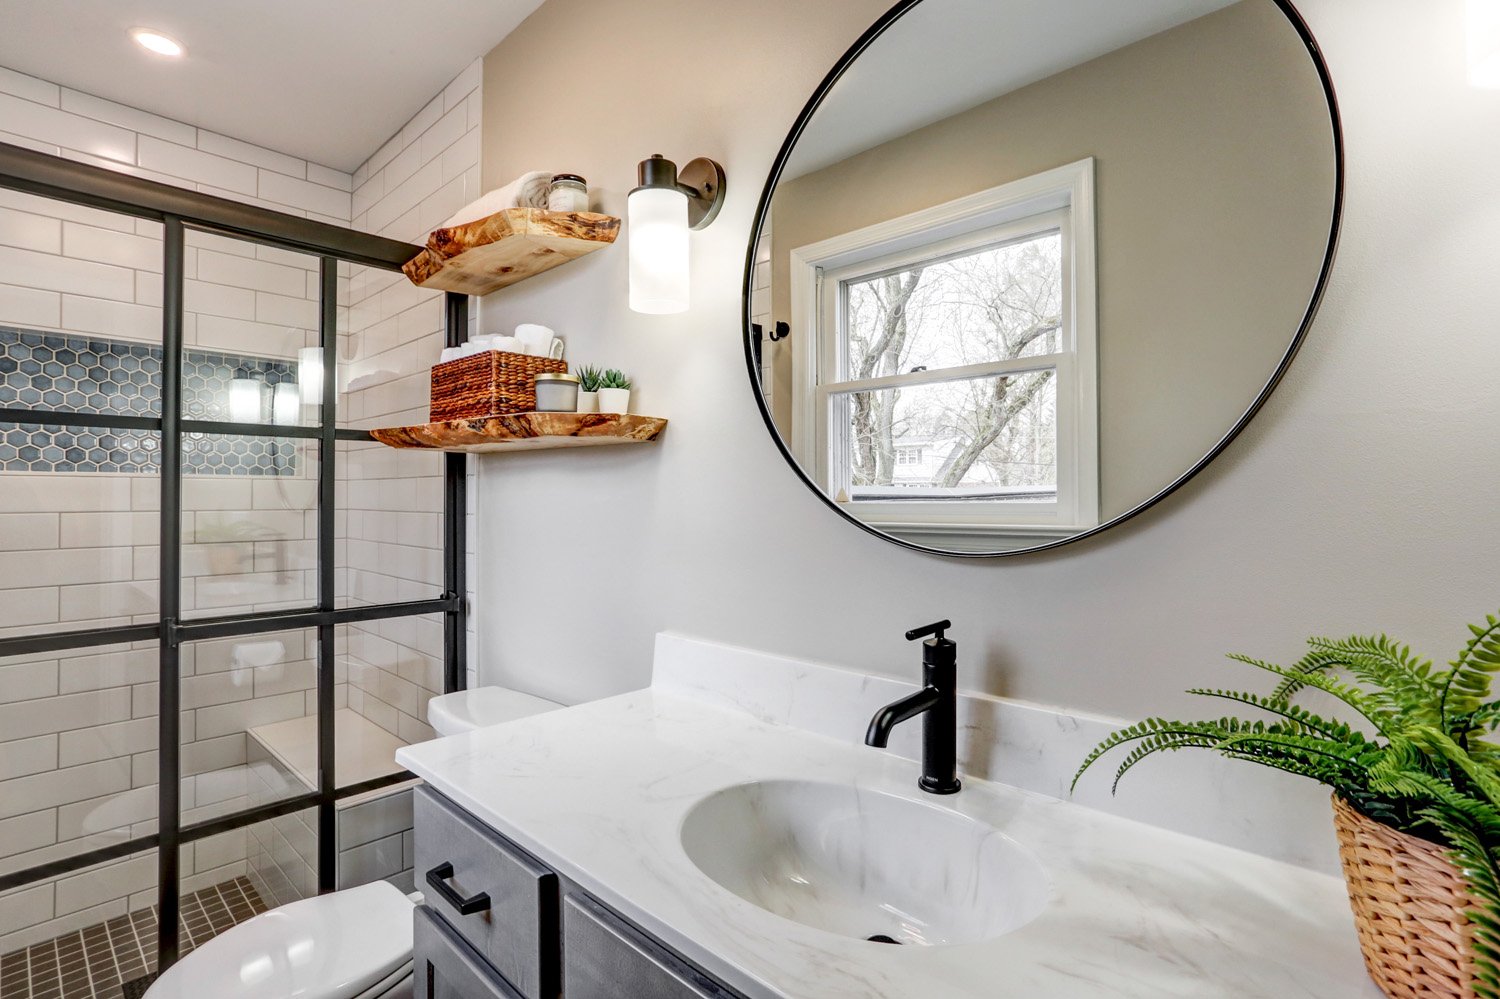 Round mirror and black faucet in Lancaster bathroom remodel